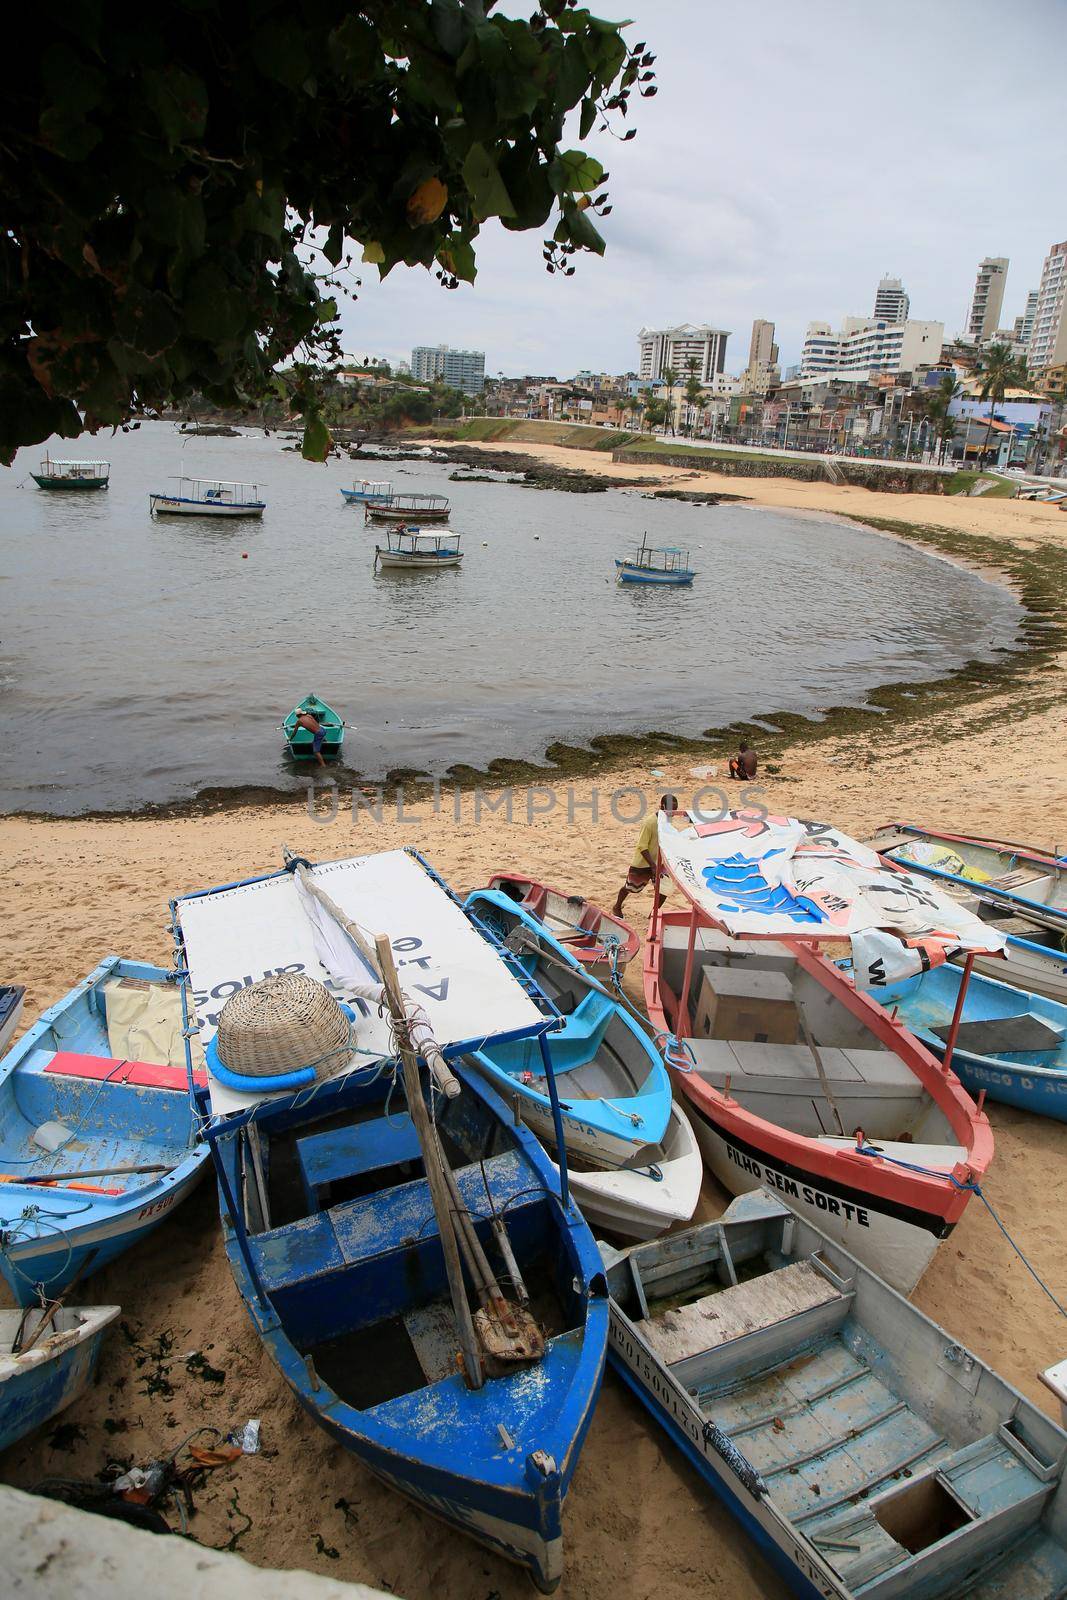 salvador, bahia, brazil - january 15, 2021: fishing boats are seen collected in the sand of Paciencia beach, in the Rio Vermelho neighborhood, in the city of Salvador, due to rainy weather.